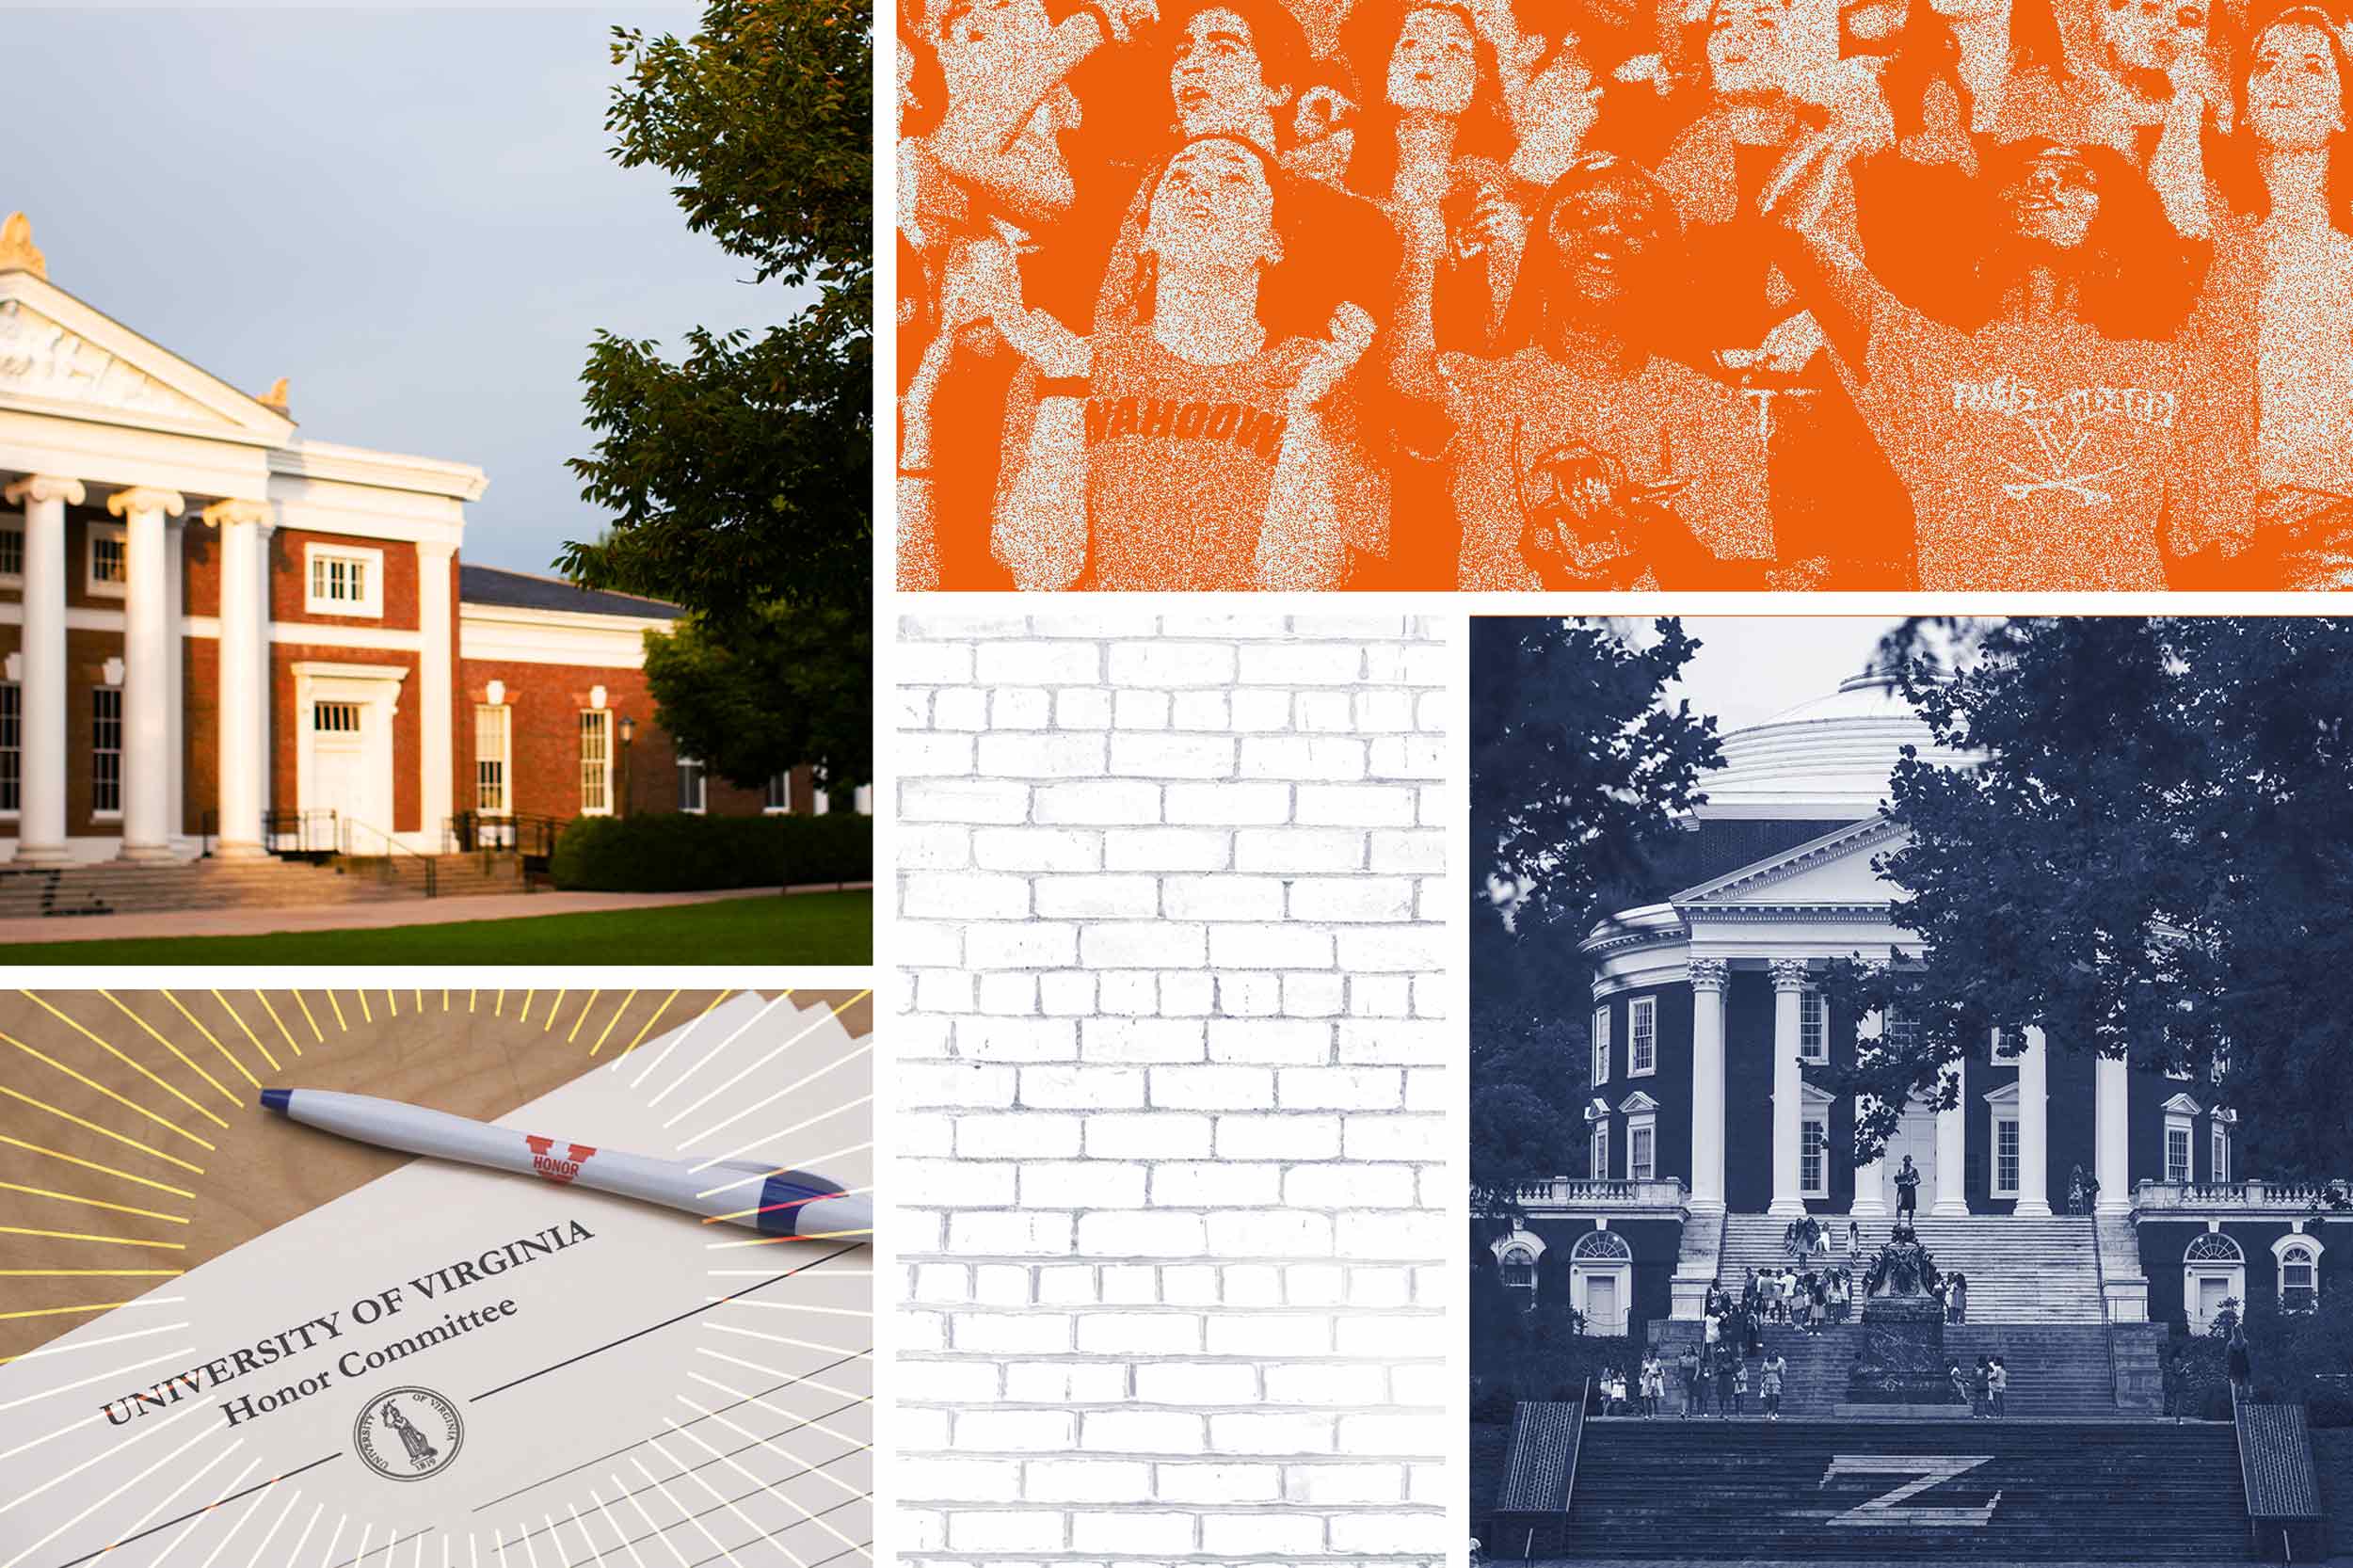 Photo Collage of Old Cabel Hall, the Honor System, fans cheering in orange shirts, a white brick wall and the Rotunda with students on the steps in front. 